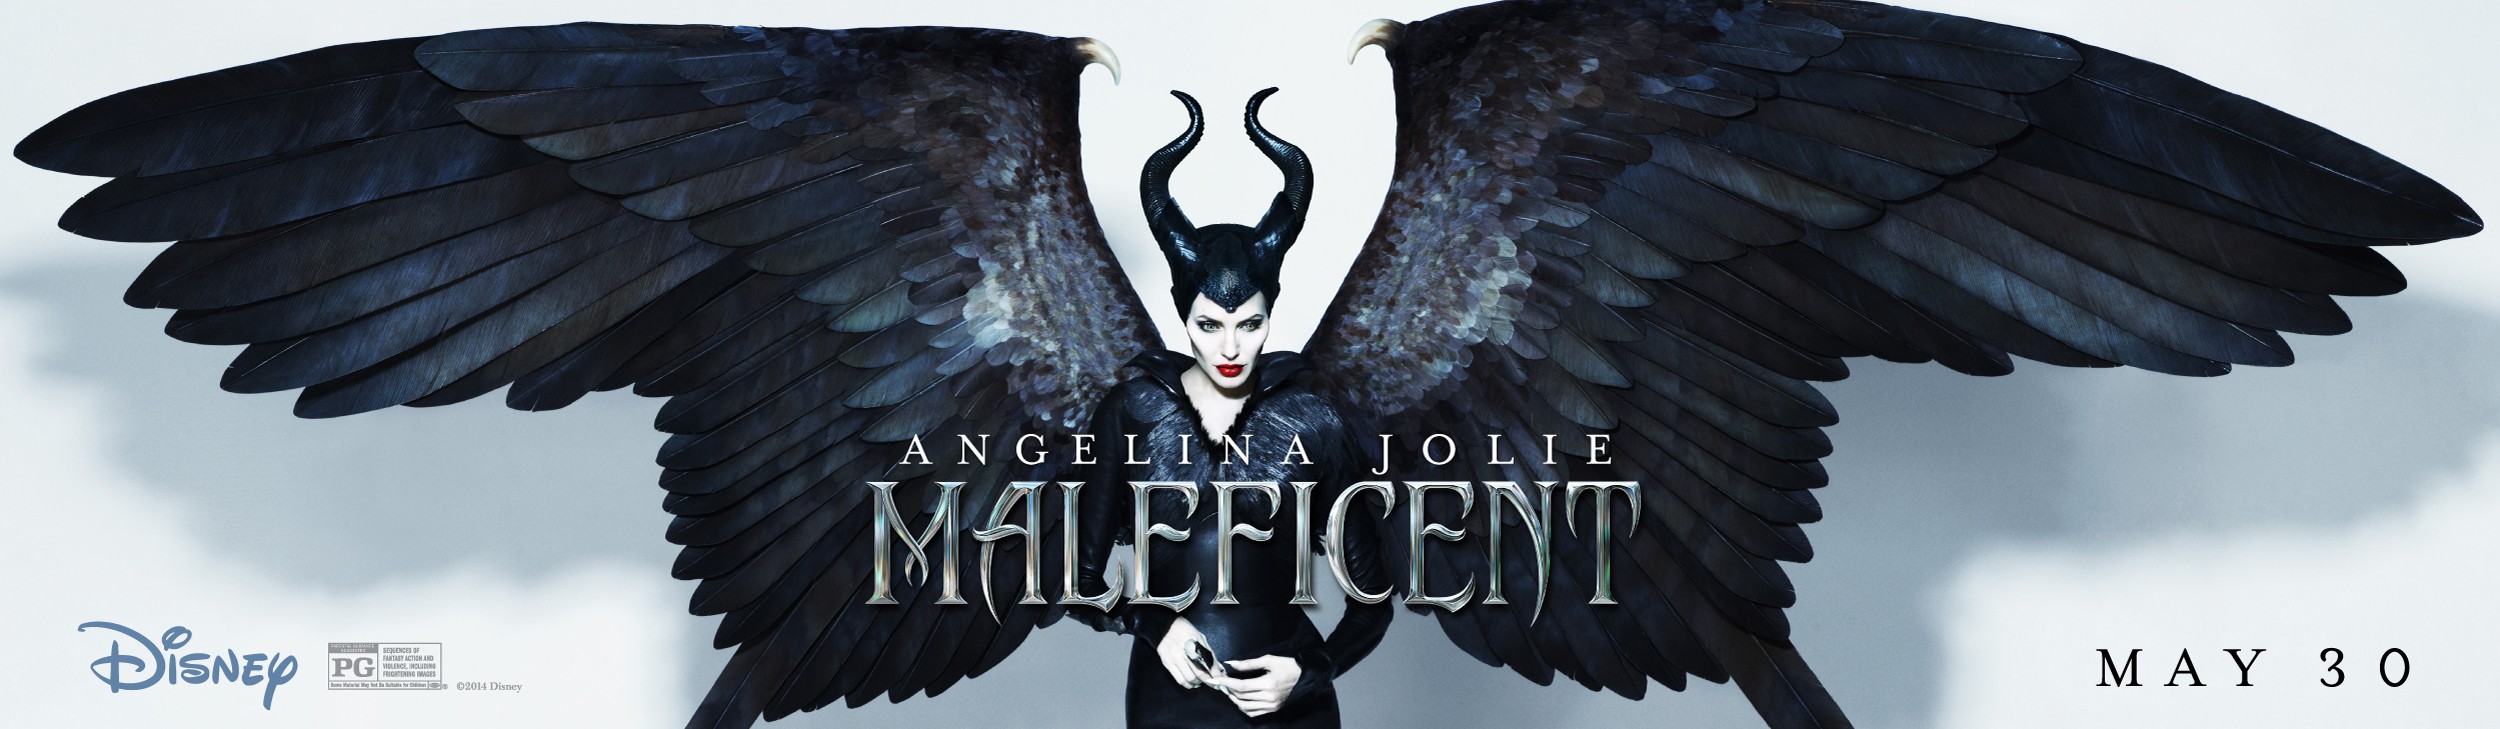 Mega Sized Movie Poster Image for Maleficent (#4 of 14)